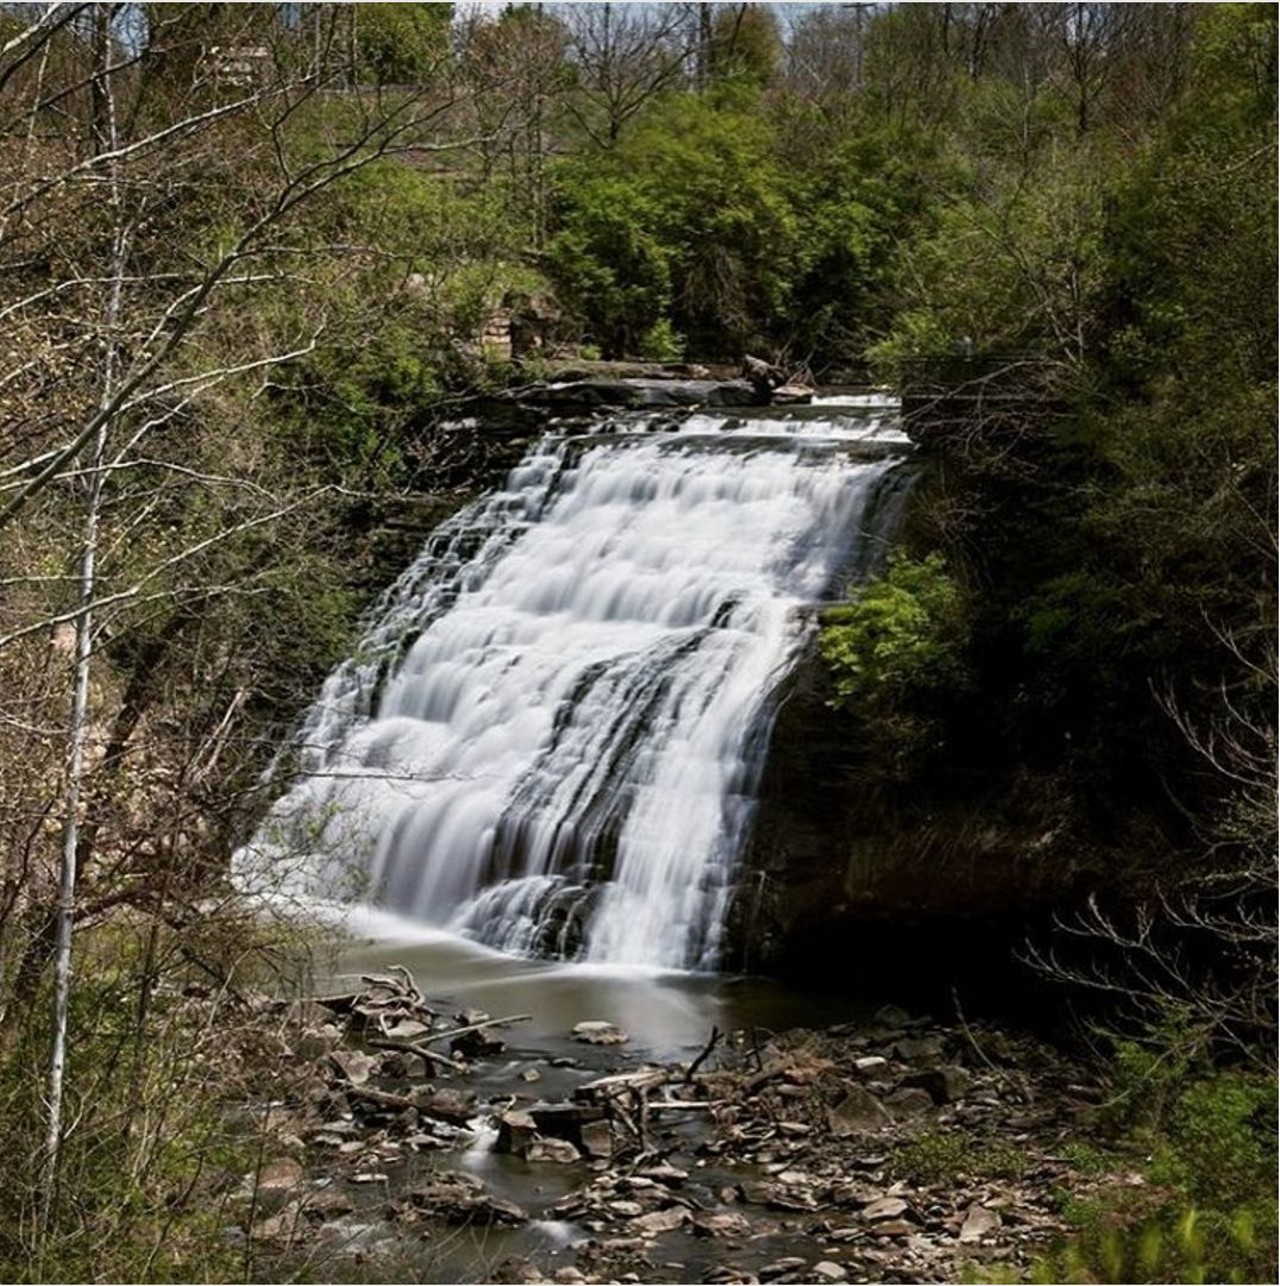 Mill Creek Falls
717-881-6473,  Mill Creek Trail
Located in Garfield Park Reservation, the Mill Creek Falls is a gorgeous sight to take in. Park in the reservation off Warner Rd. and take a light 1.5 mile hike to the falls.
Photo via clevemetroparks/Instagram